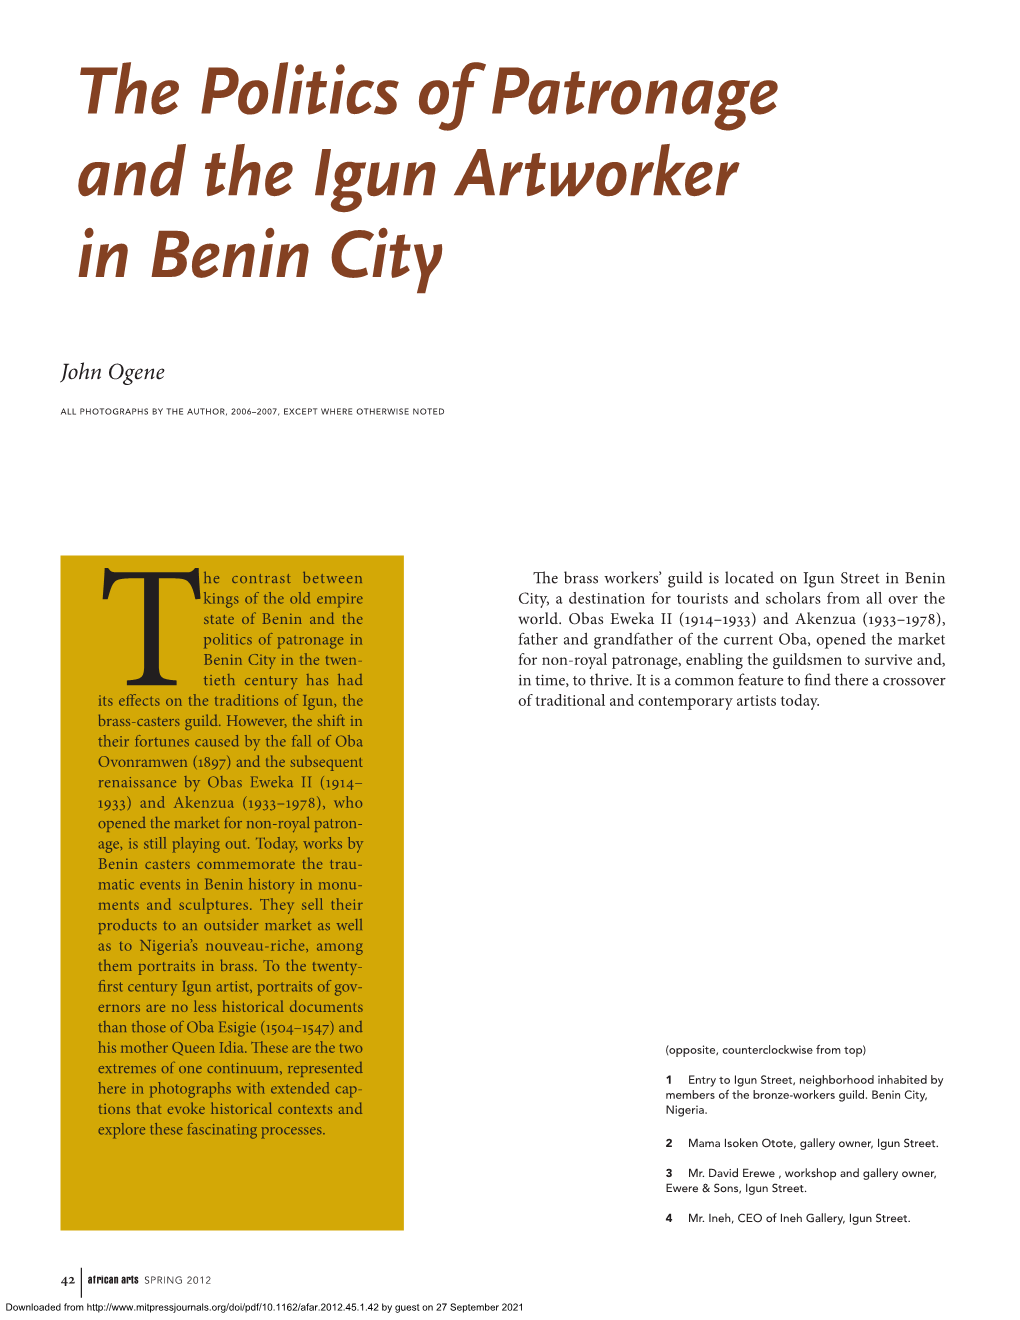 The Politics of Patronage and the Igun Artworker in Benin City